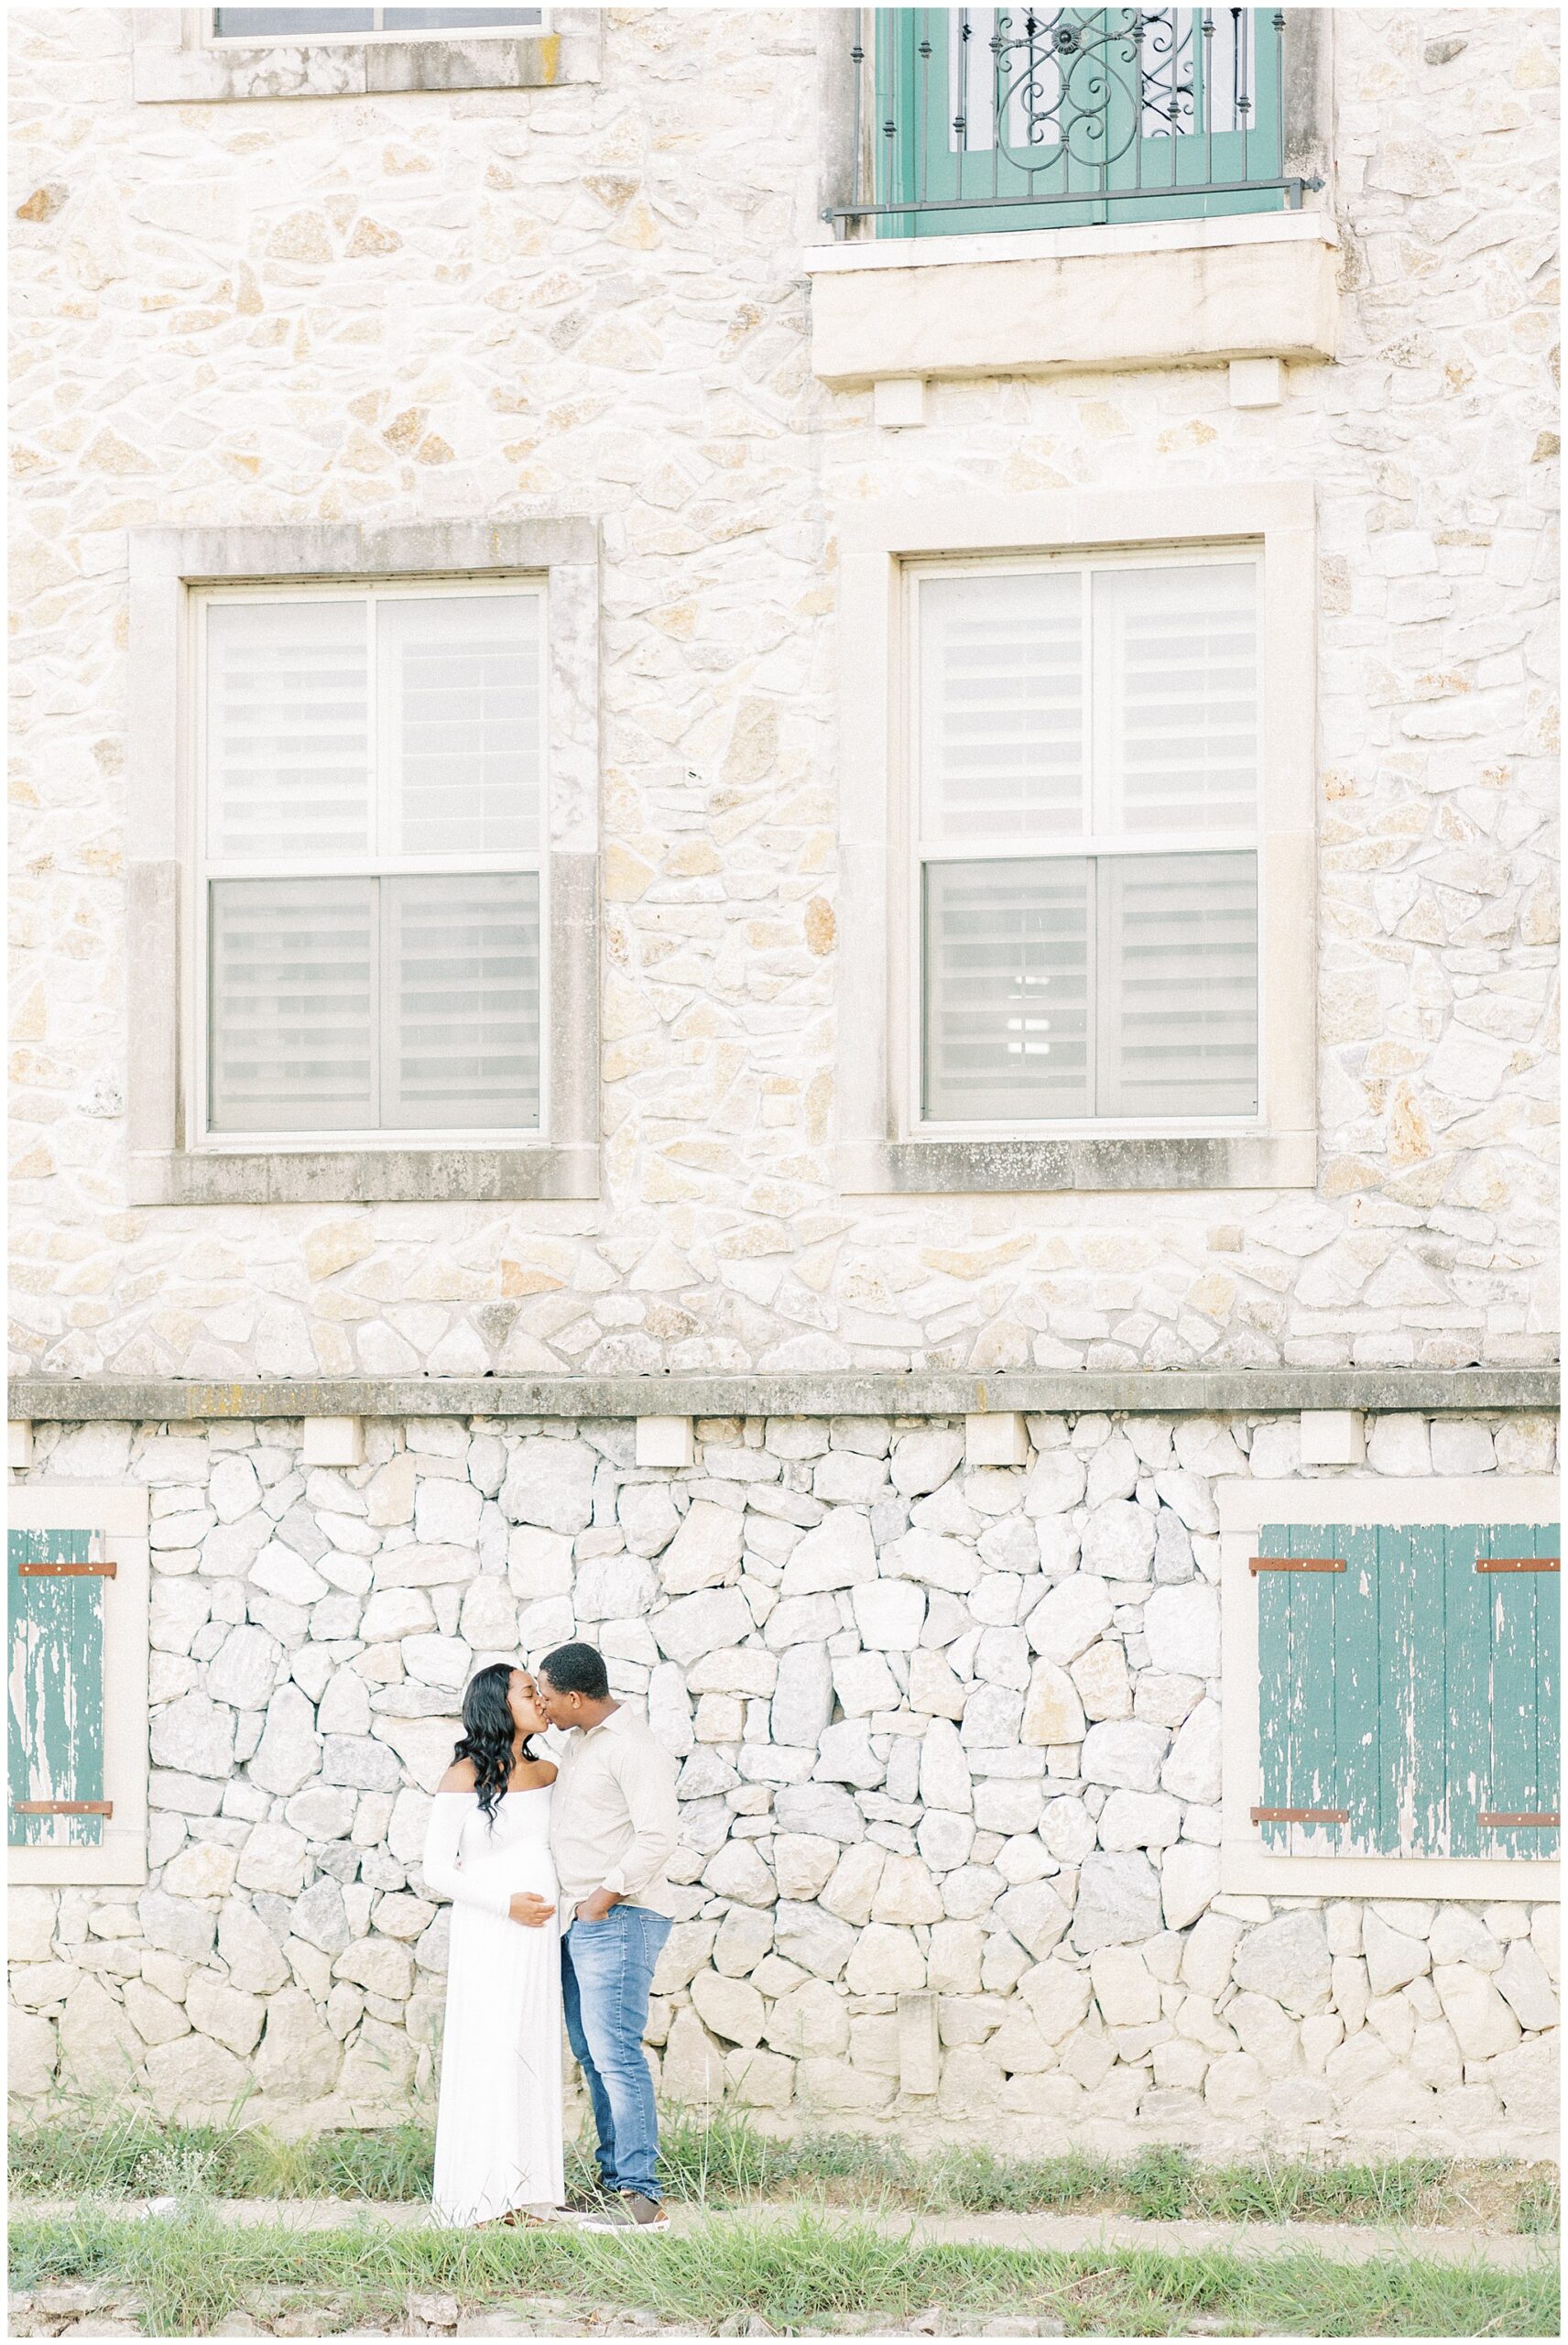 Parents to be stand kissing on a sidewalk in front of a historical stone building with green shutters